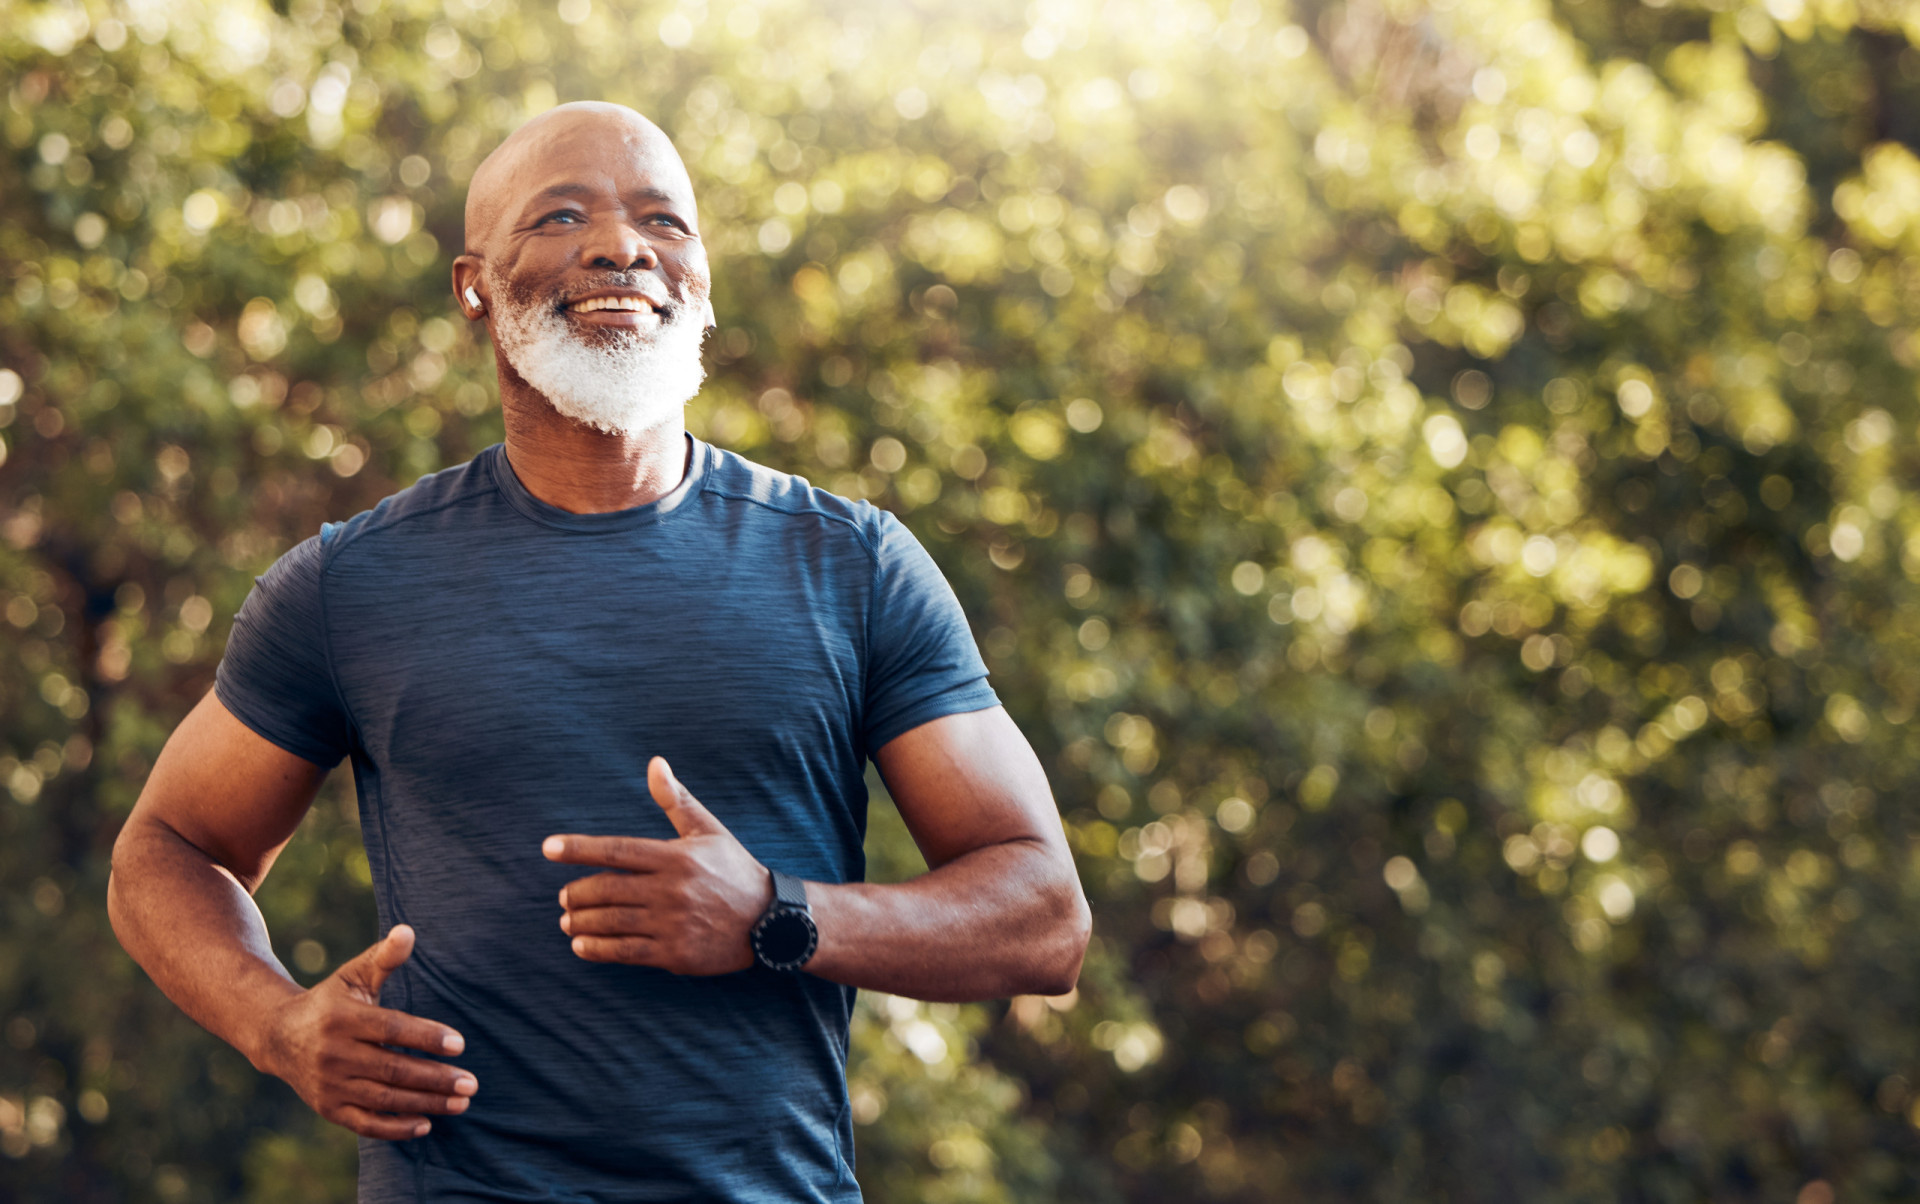 <p>When exercise is frequent and consistent, it has been linked to an increase in the volume of the brain, particularly in the region called the hippocampus.</p><p><a href="https://www.msn.com/en-in/community/channel/vid-7xx8mnucu55yw63we9va2gwr7uihbxwc68fxqp25x6tg4ftibpra?cvid=94631541bc0f4f89bfd59158d696ad7e">Follow us and access great exclusive content every day</a></p>